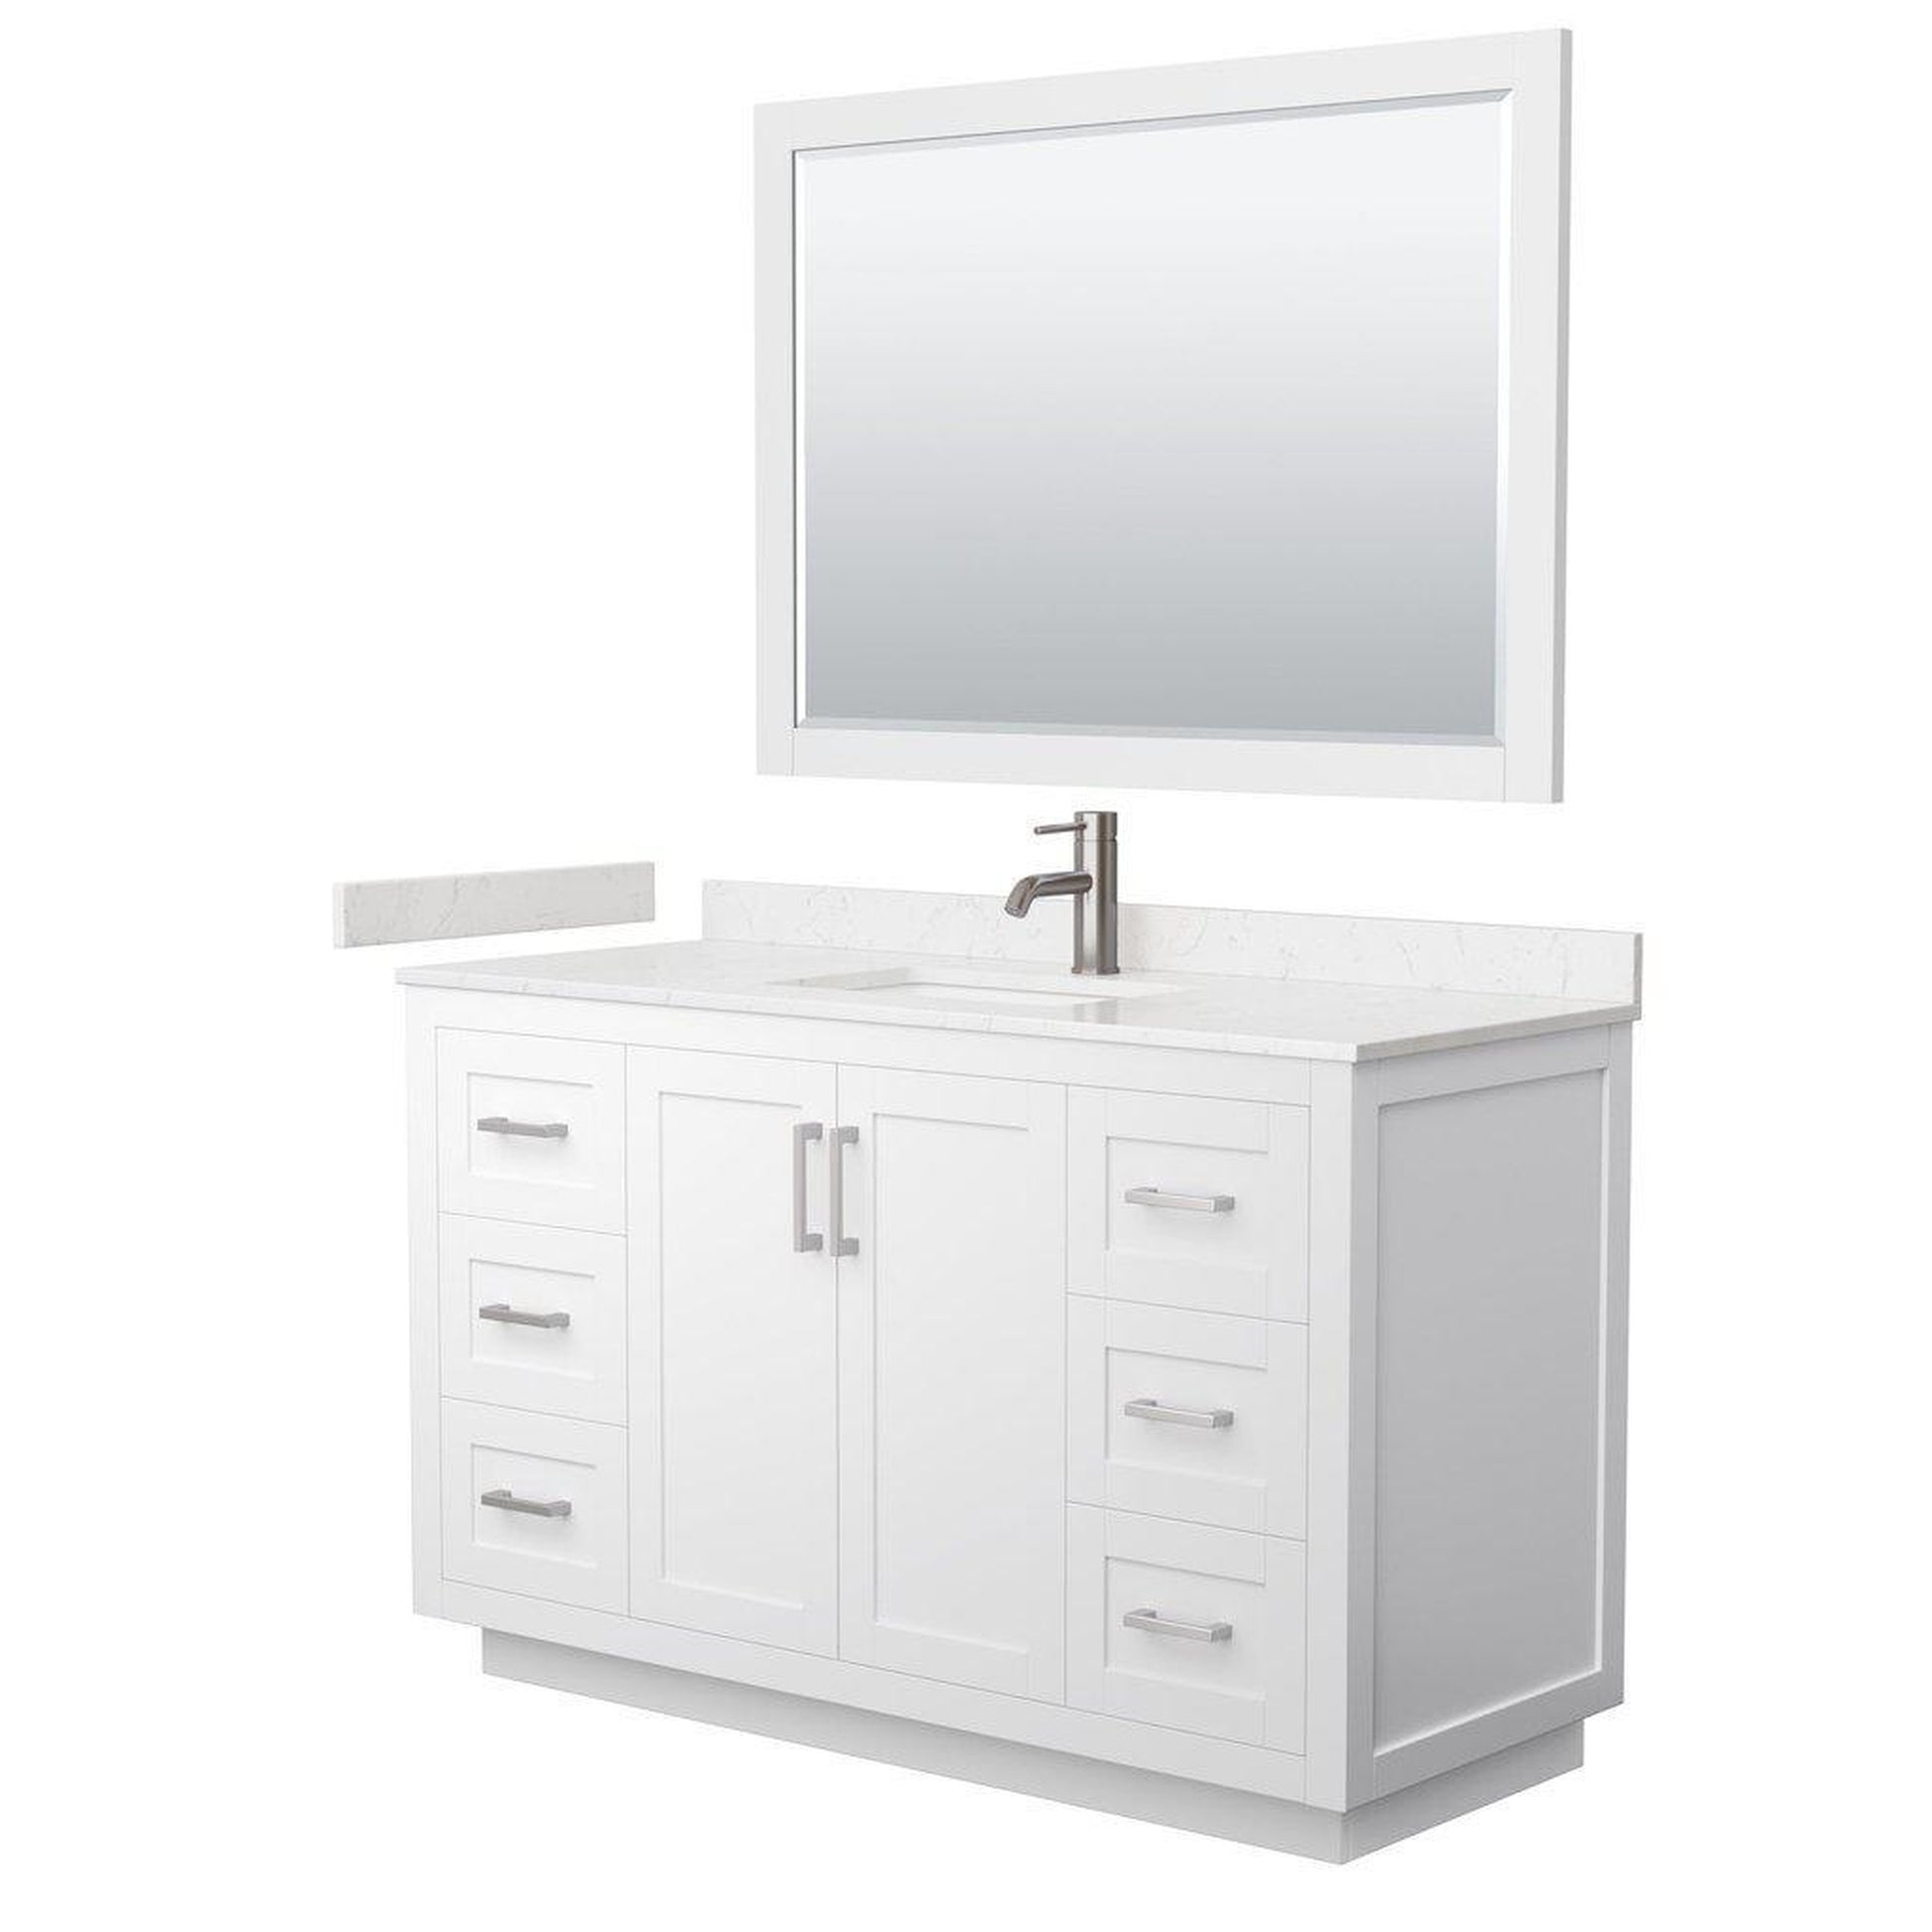 Wyndham Collection Miranda 54" Single Bathroom White Vanity Set With Light-Vein Carrara Cultured Marble Countertop, Undermount Square Sink, 46" Mirror And Brushed Nickel Trim